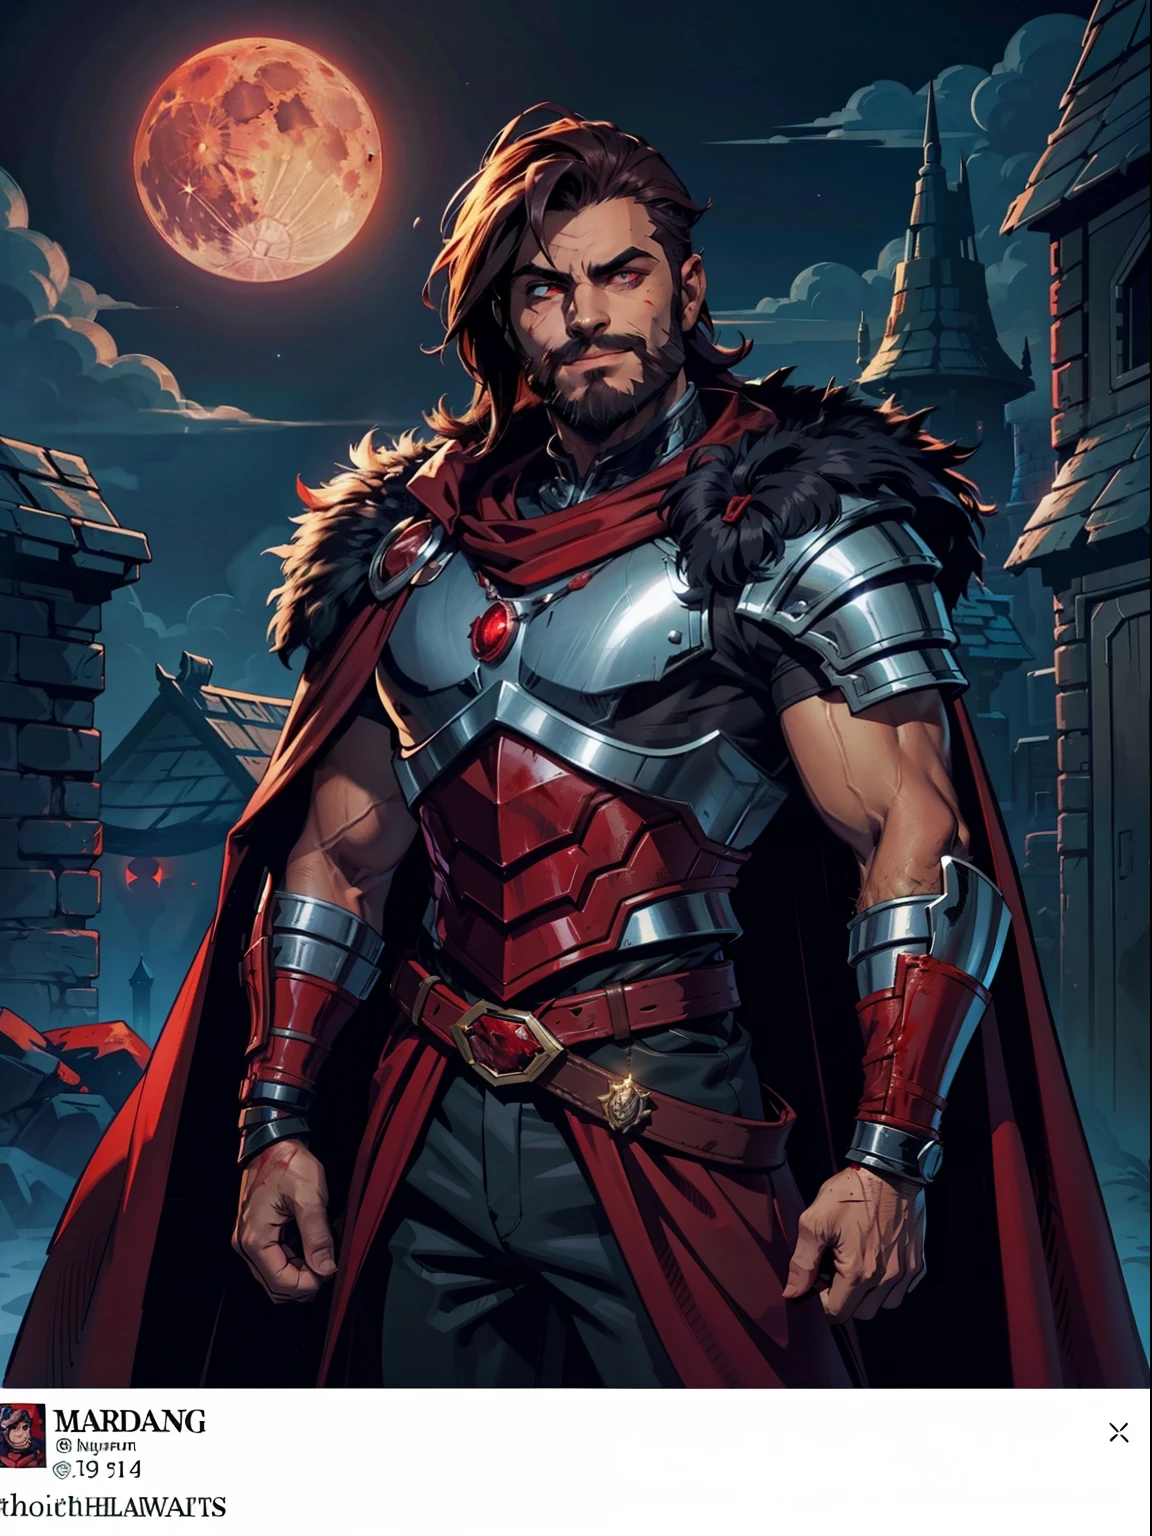 Dark night blood moon background, Darkest dungeon style, looking at the moon, game portrait, Sadurang from Marvel, hunk, short mane hair, mullet, defined face, detailed eyes, short beard, glowing red eyes, dark hair, wily smile, badass, dangerous, wearing armor set of red dragon scales, cape of furs